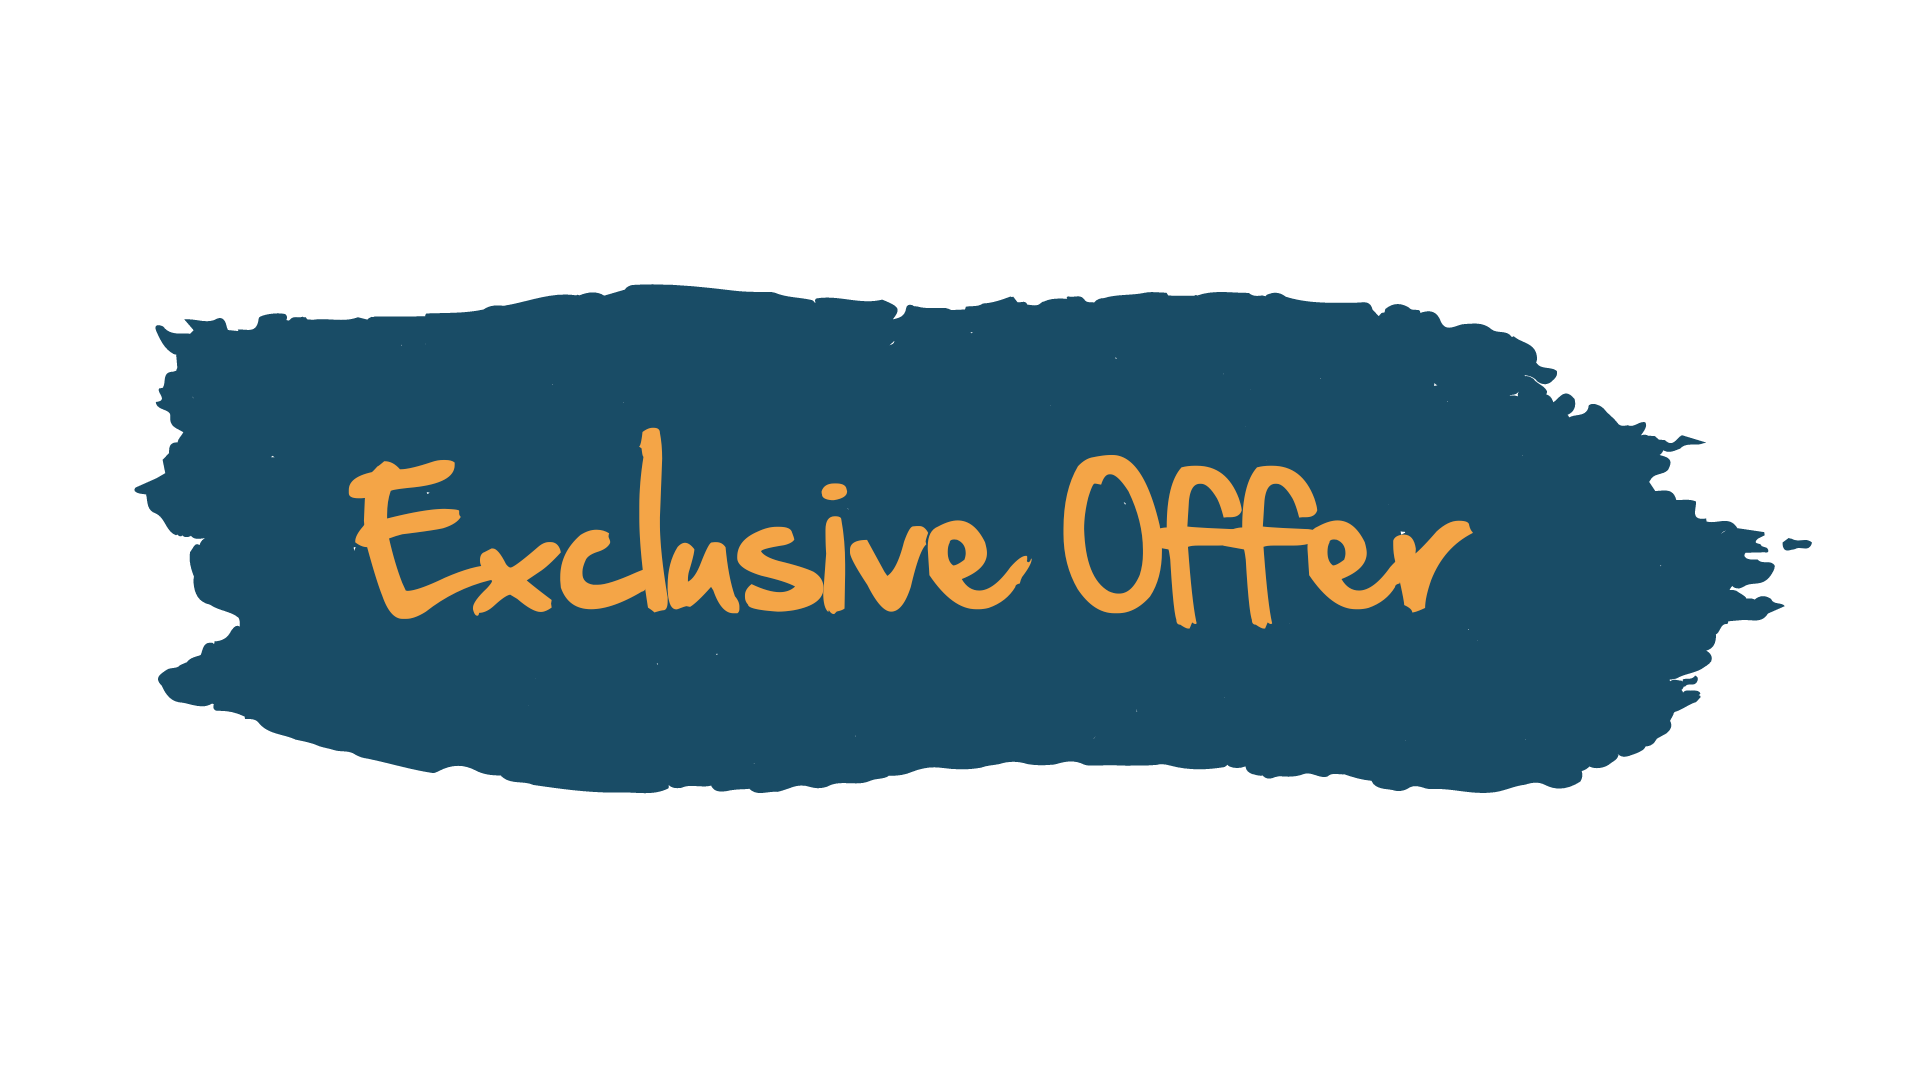 Exclusive offer